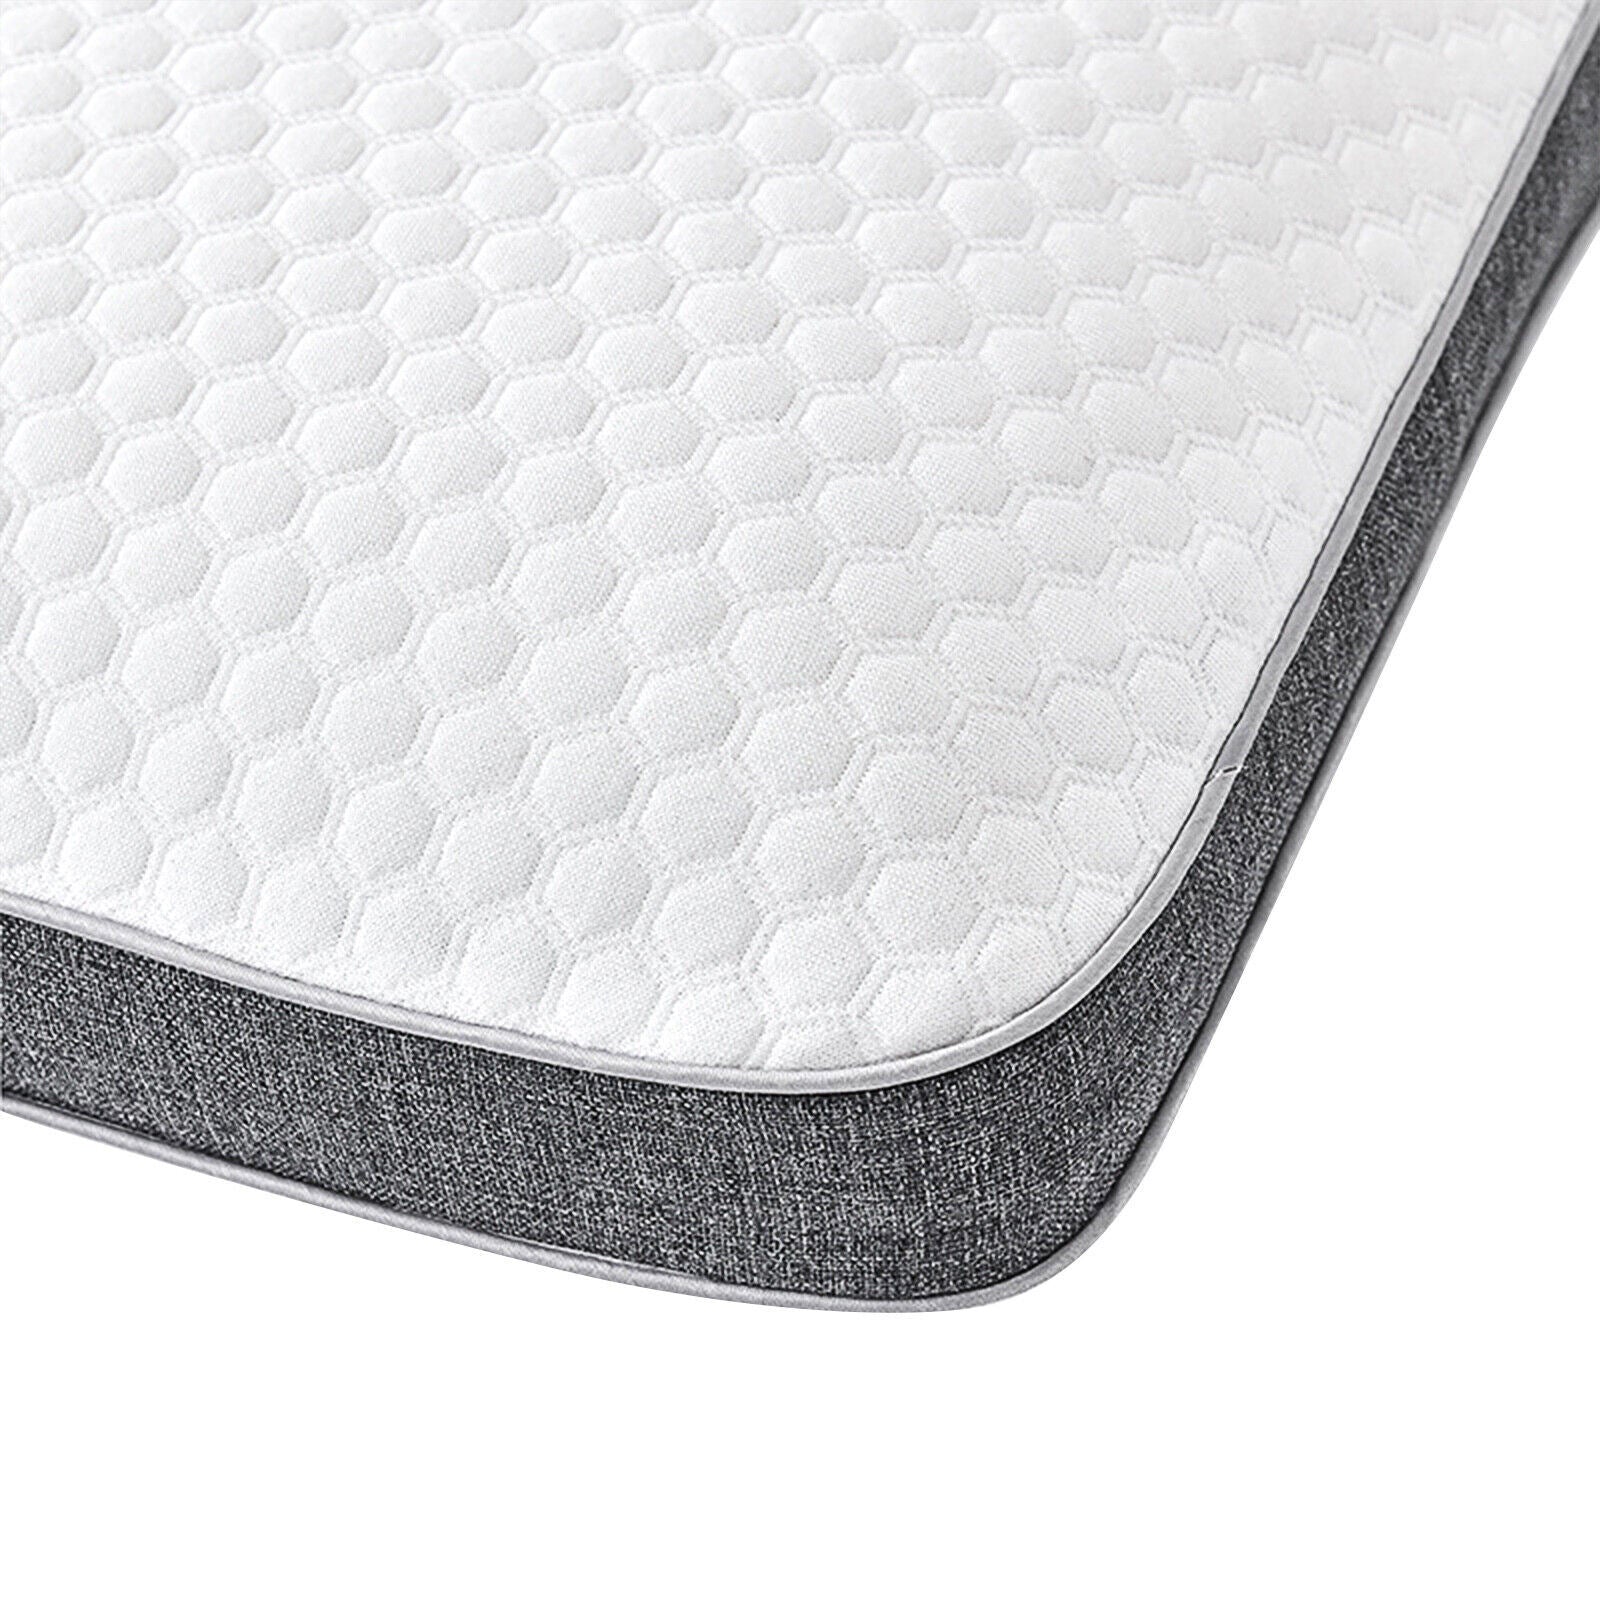 Orthopedic Neck Support Memory Foam Bed Pillow